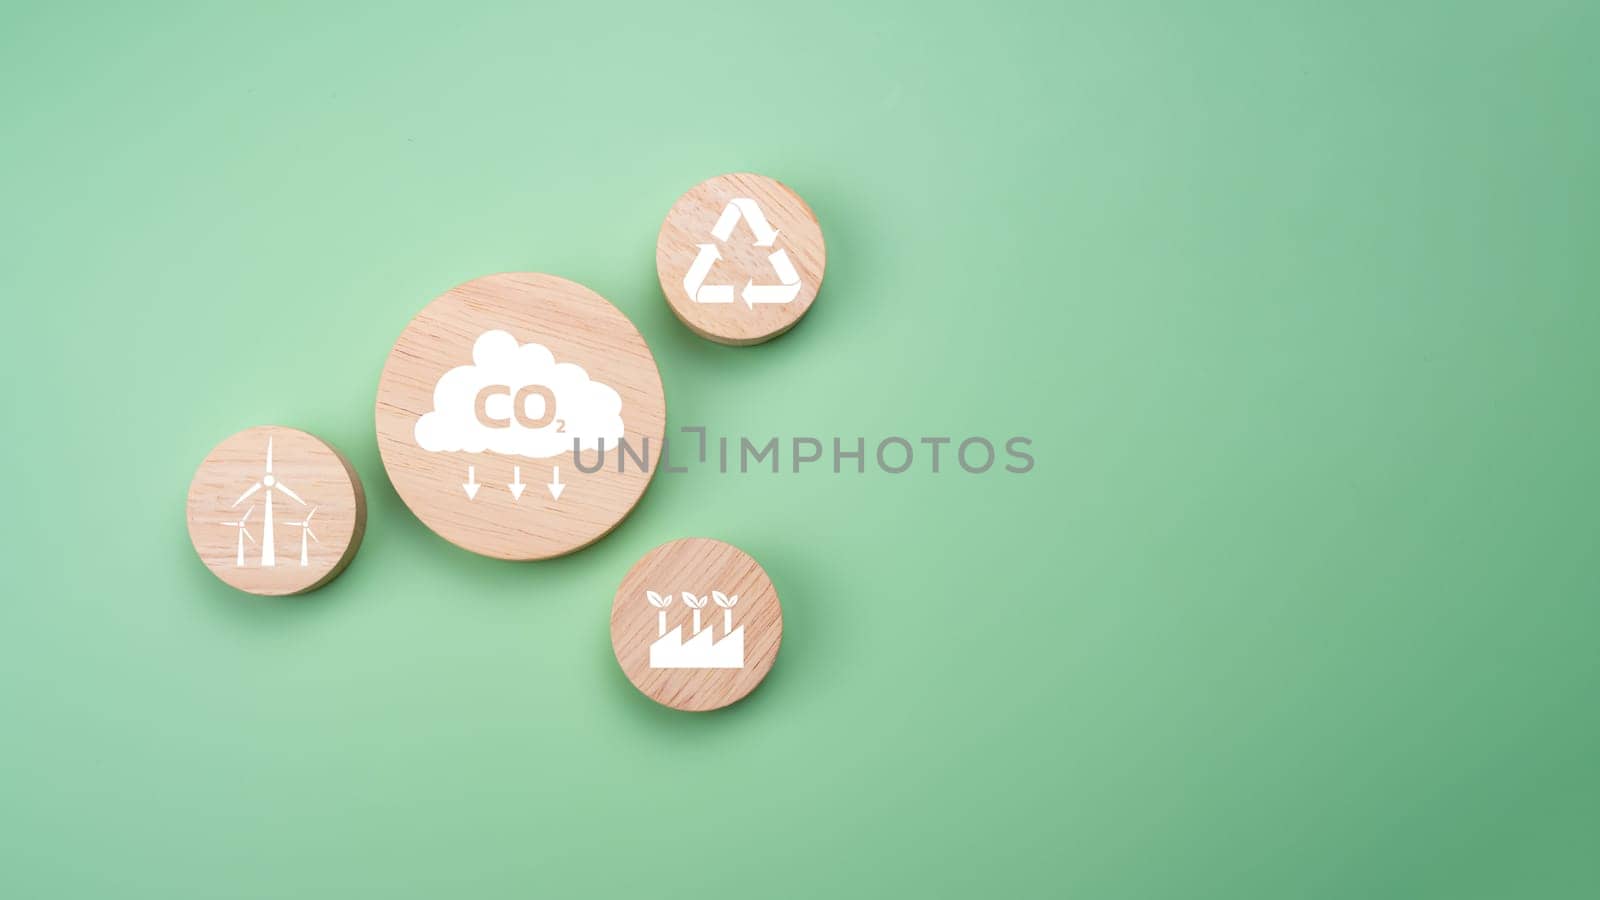 Circular wooden board with net zero icon in 2050 on green background, Net zero by 2050, Carbon neutral, Net zero green house gas emissions target, Climate neutral long term strategy, No toxic gases.  by Unimages2527